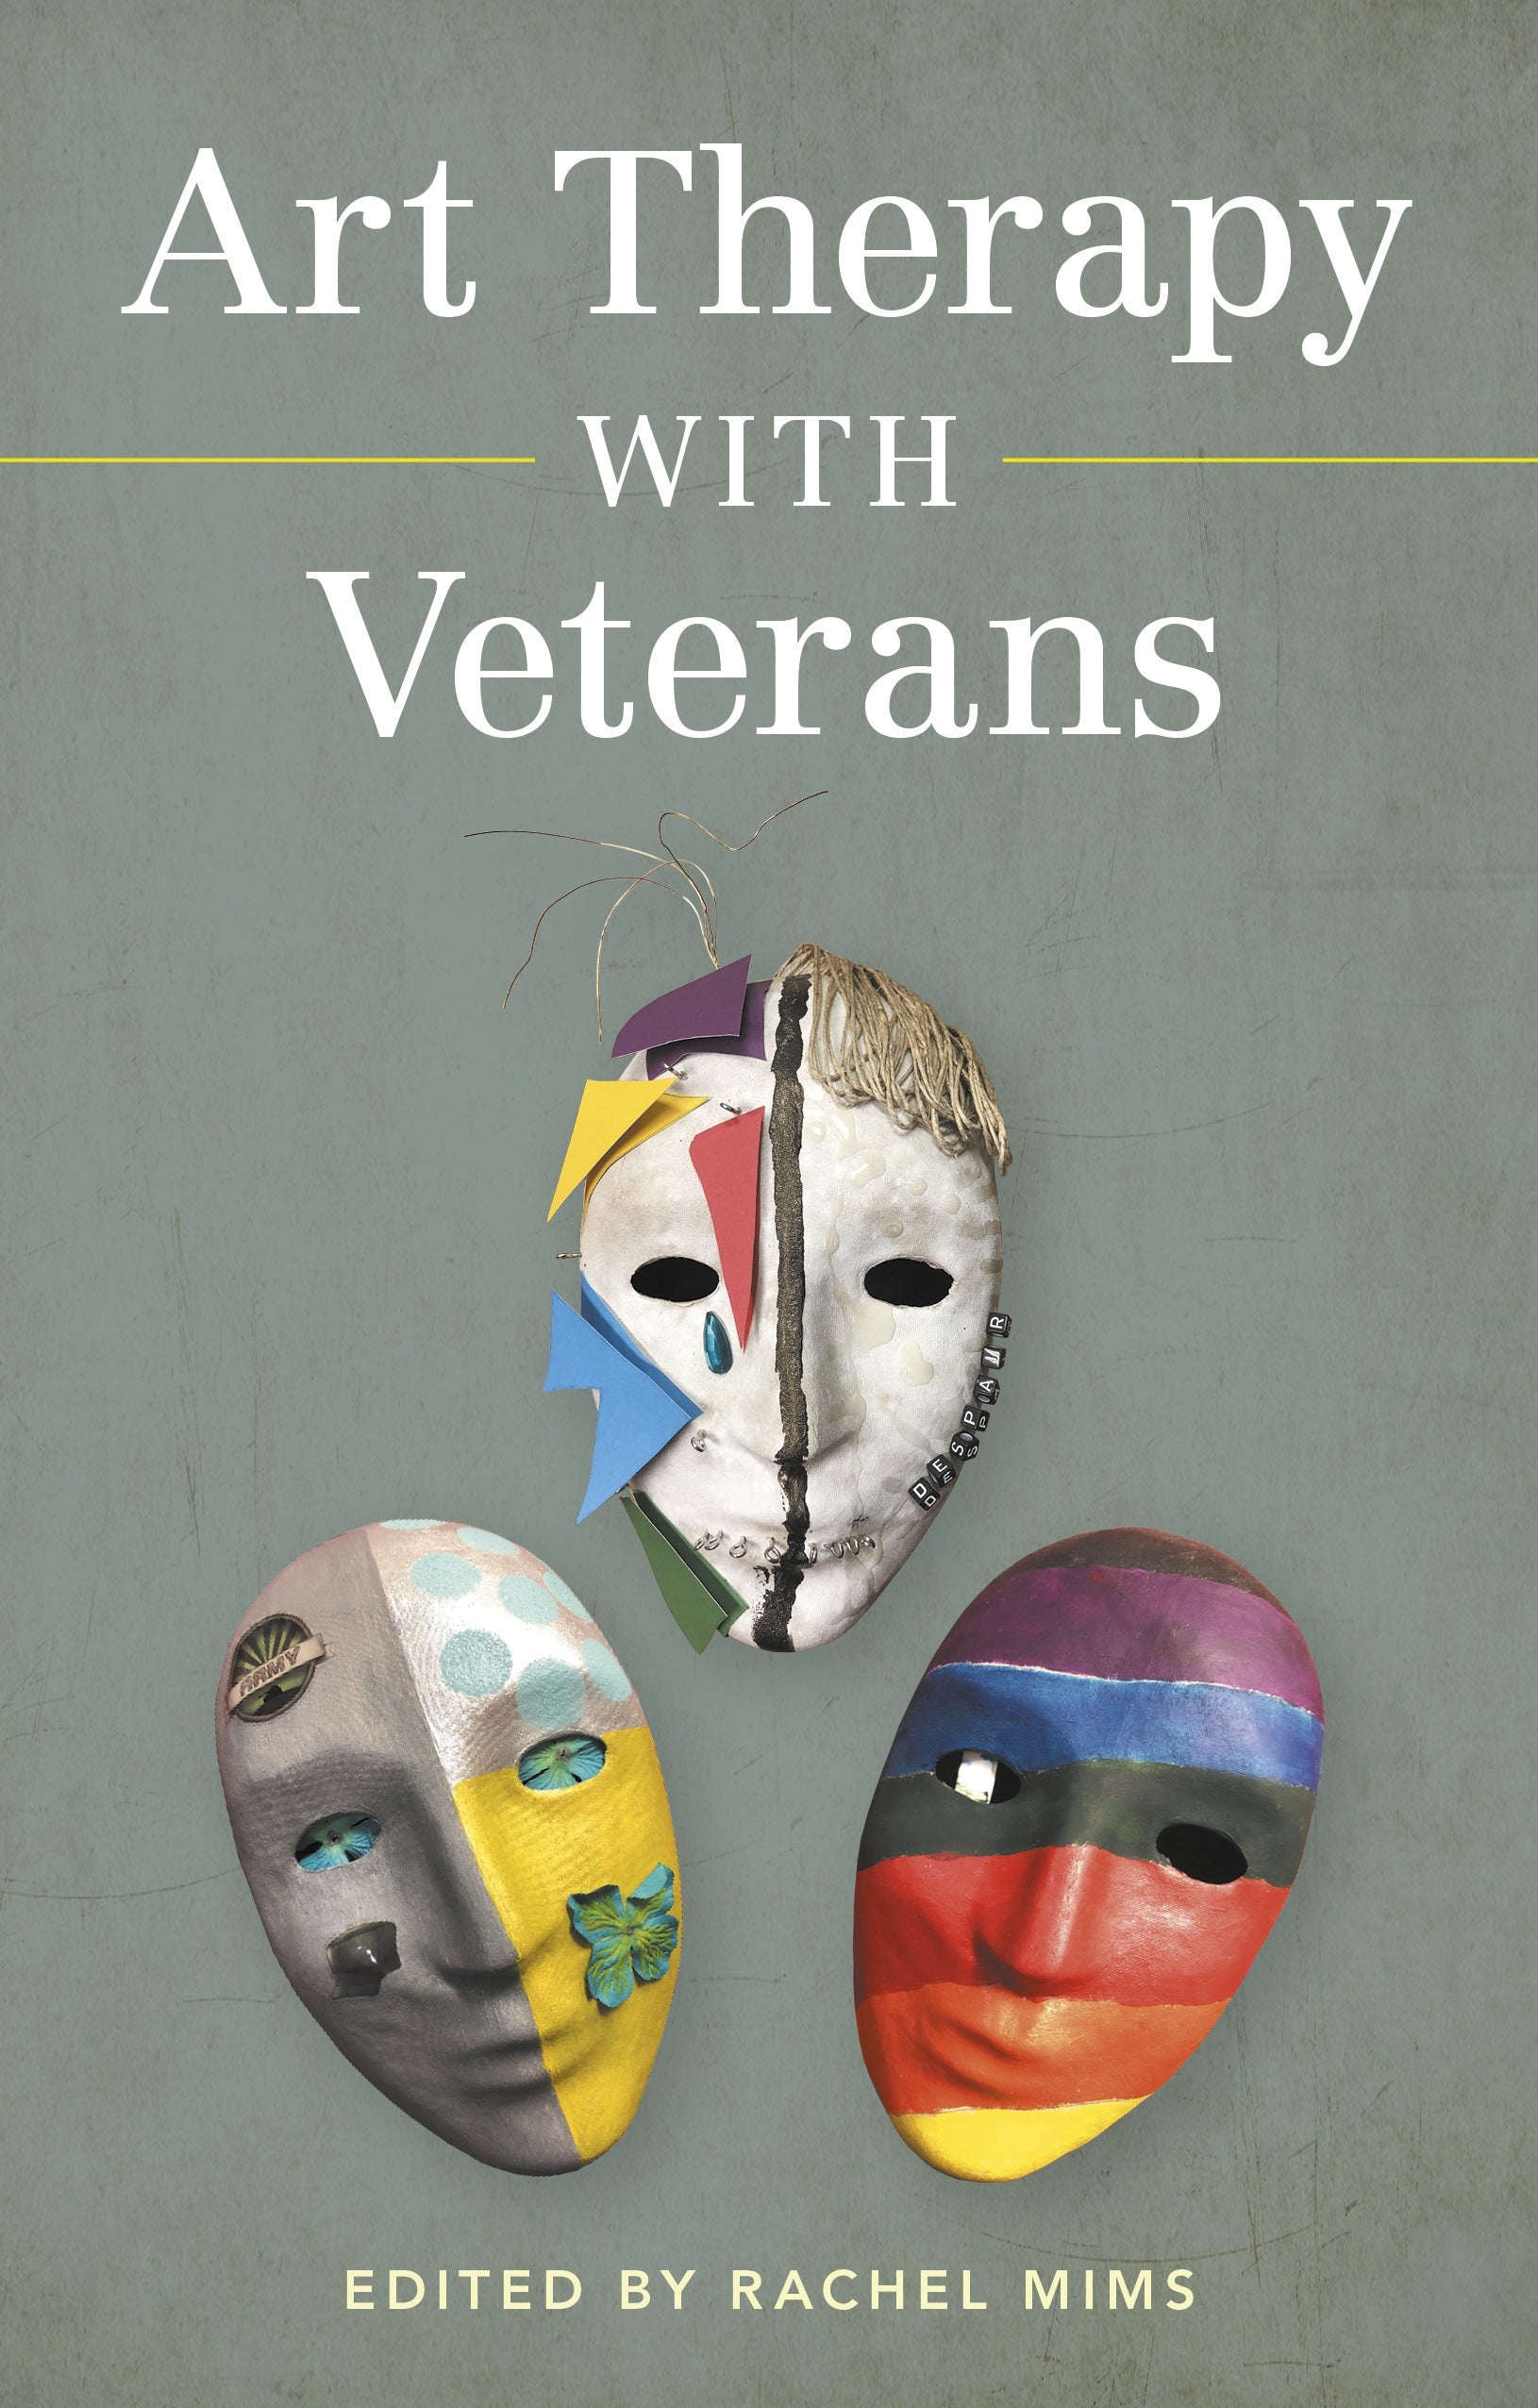 Art Therapy with Veterans by Rachel Mims, No Author Listed